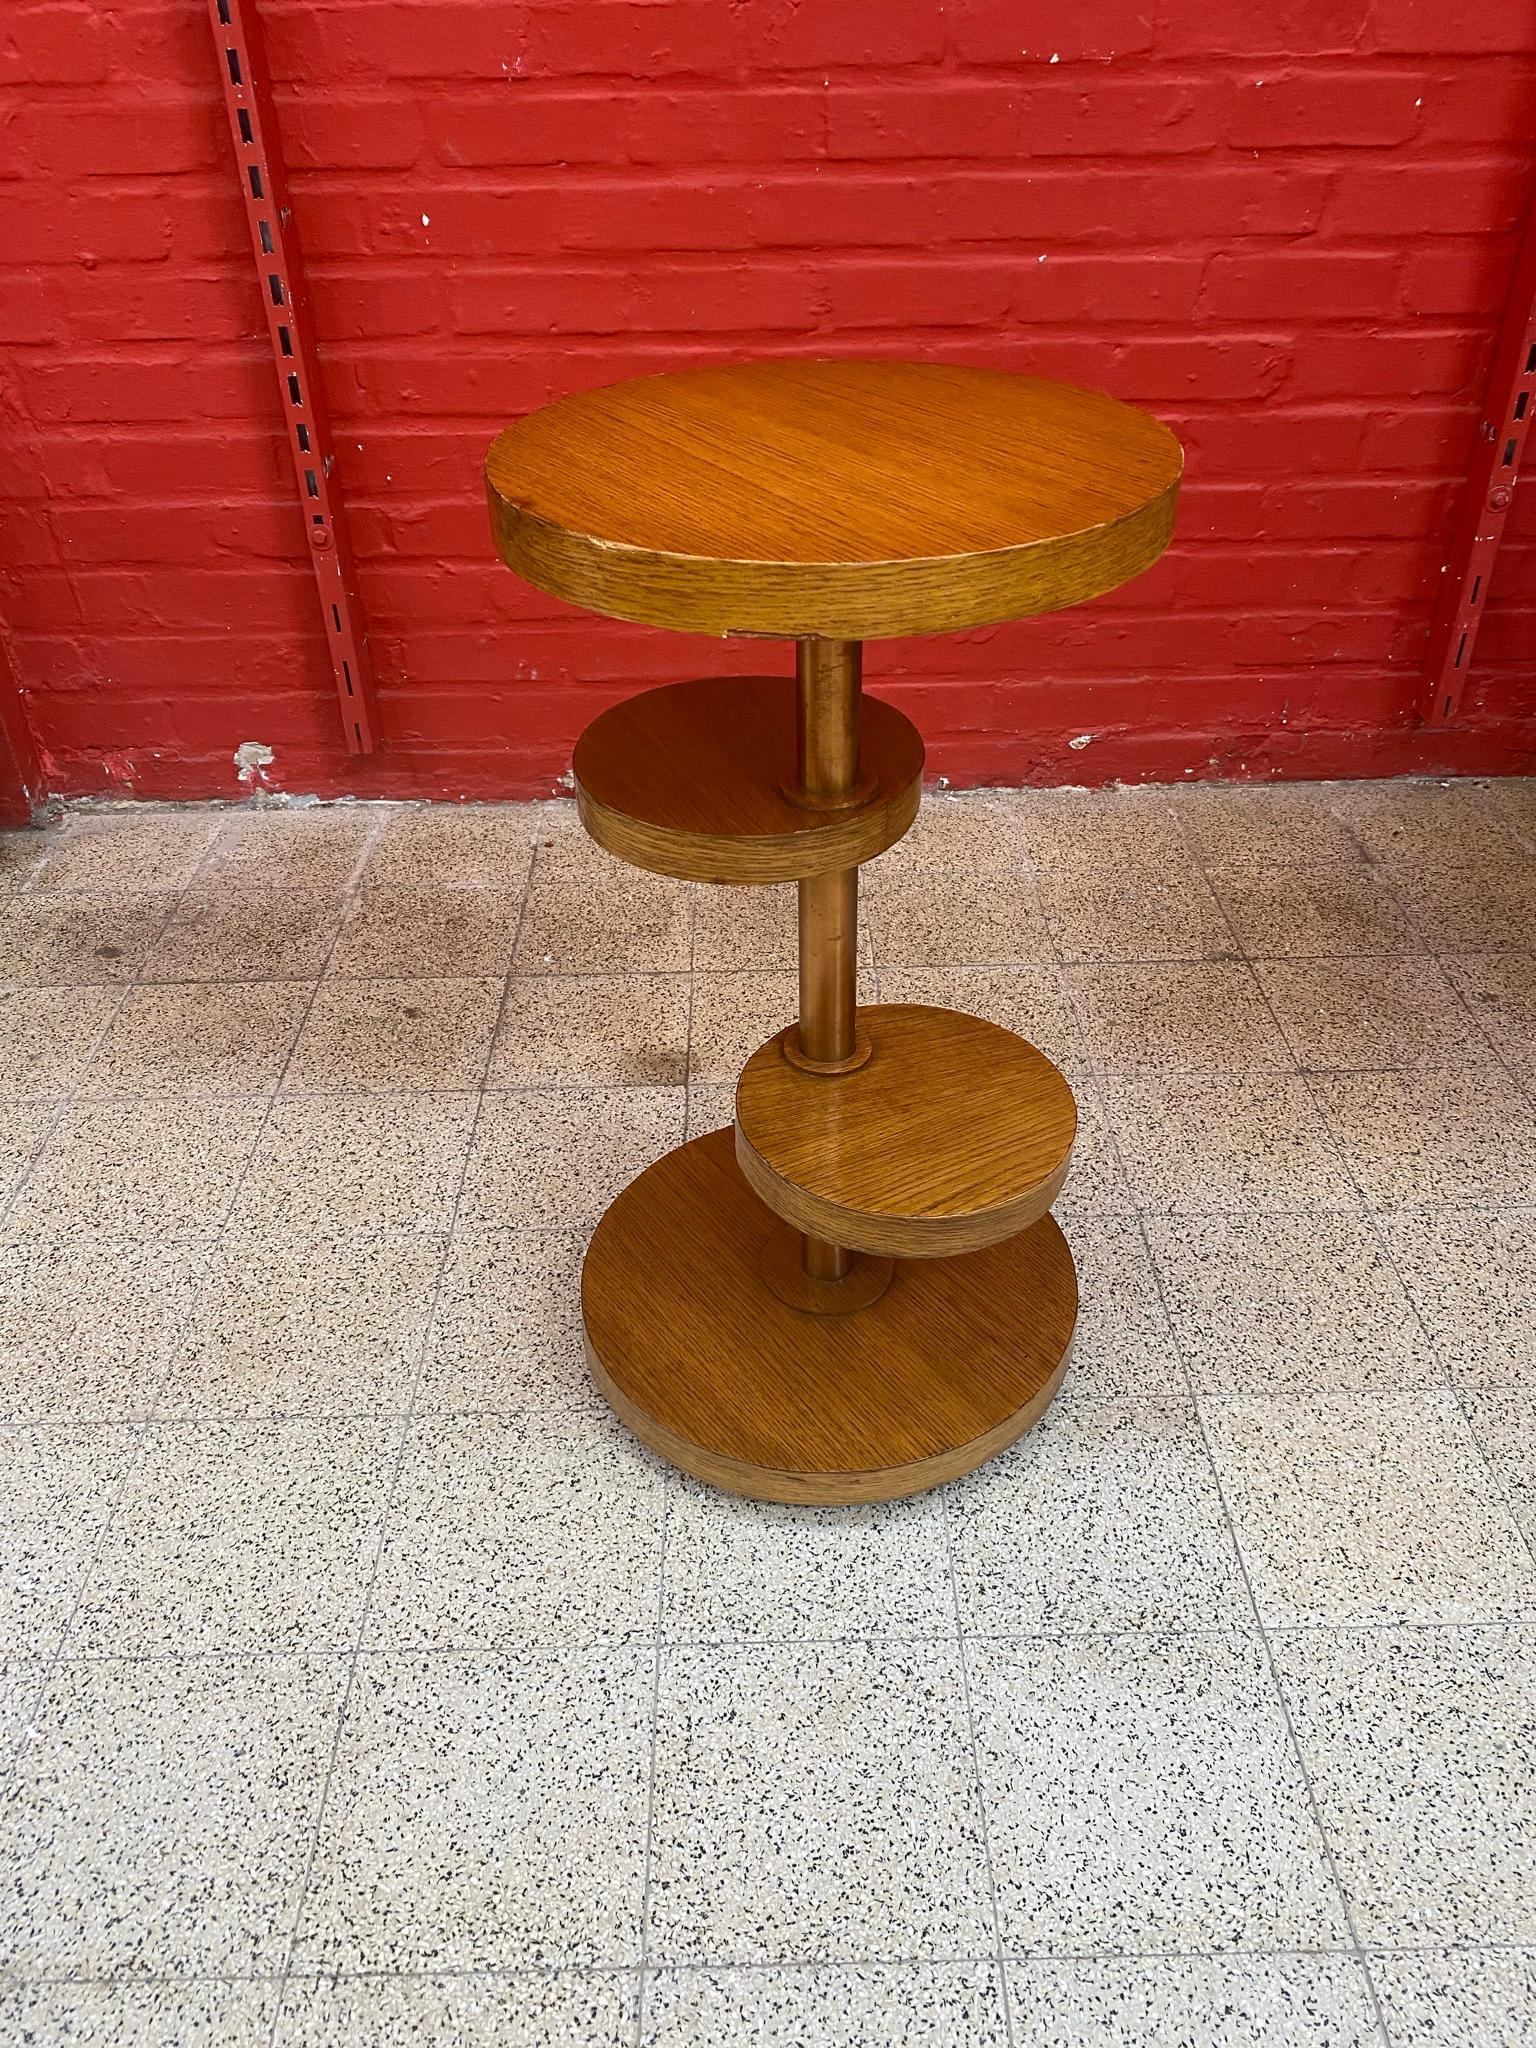 Mid-20th Century Modernist Art Deco Guéridon in Oak Veneer and Coppery Brass, circa 1930 For Sale